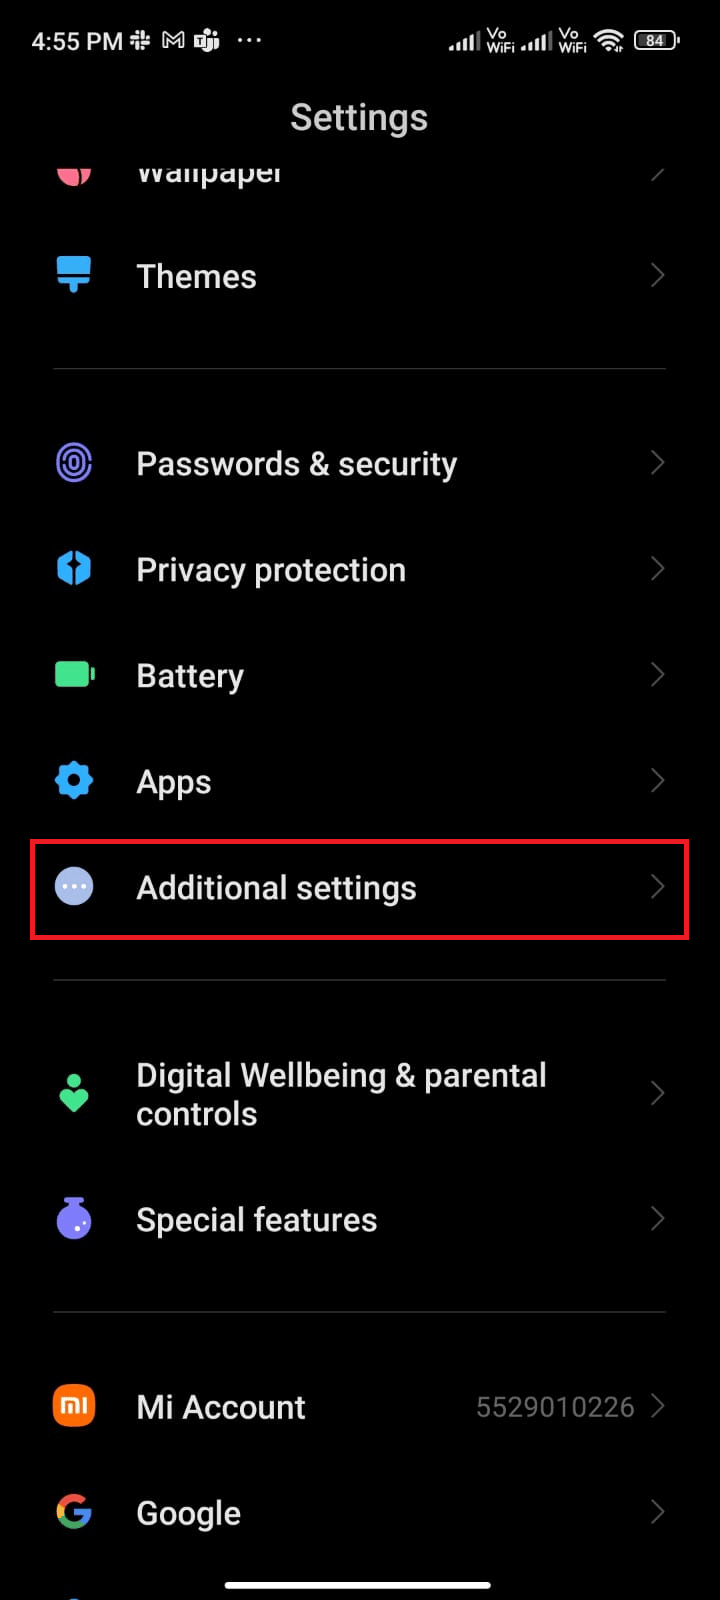 Now, scroll down the Settings screen and tap Additional settings